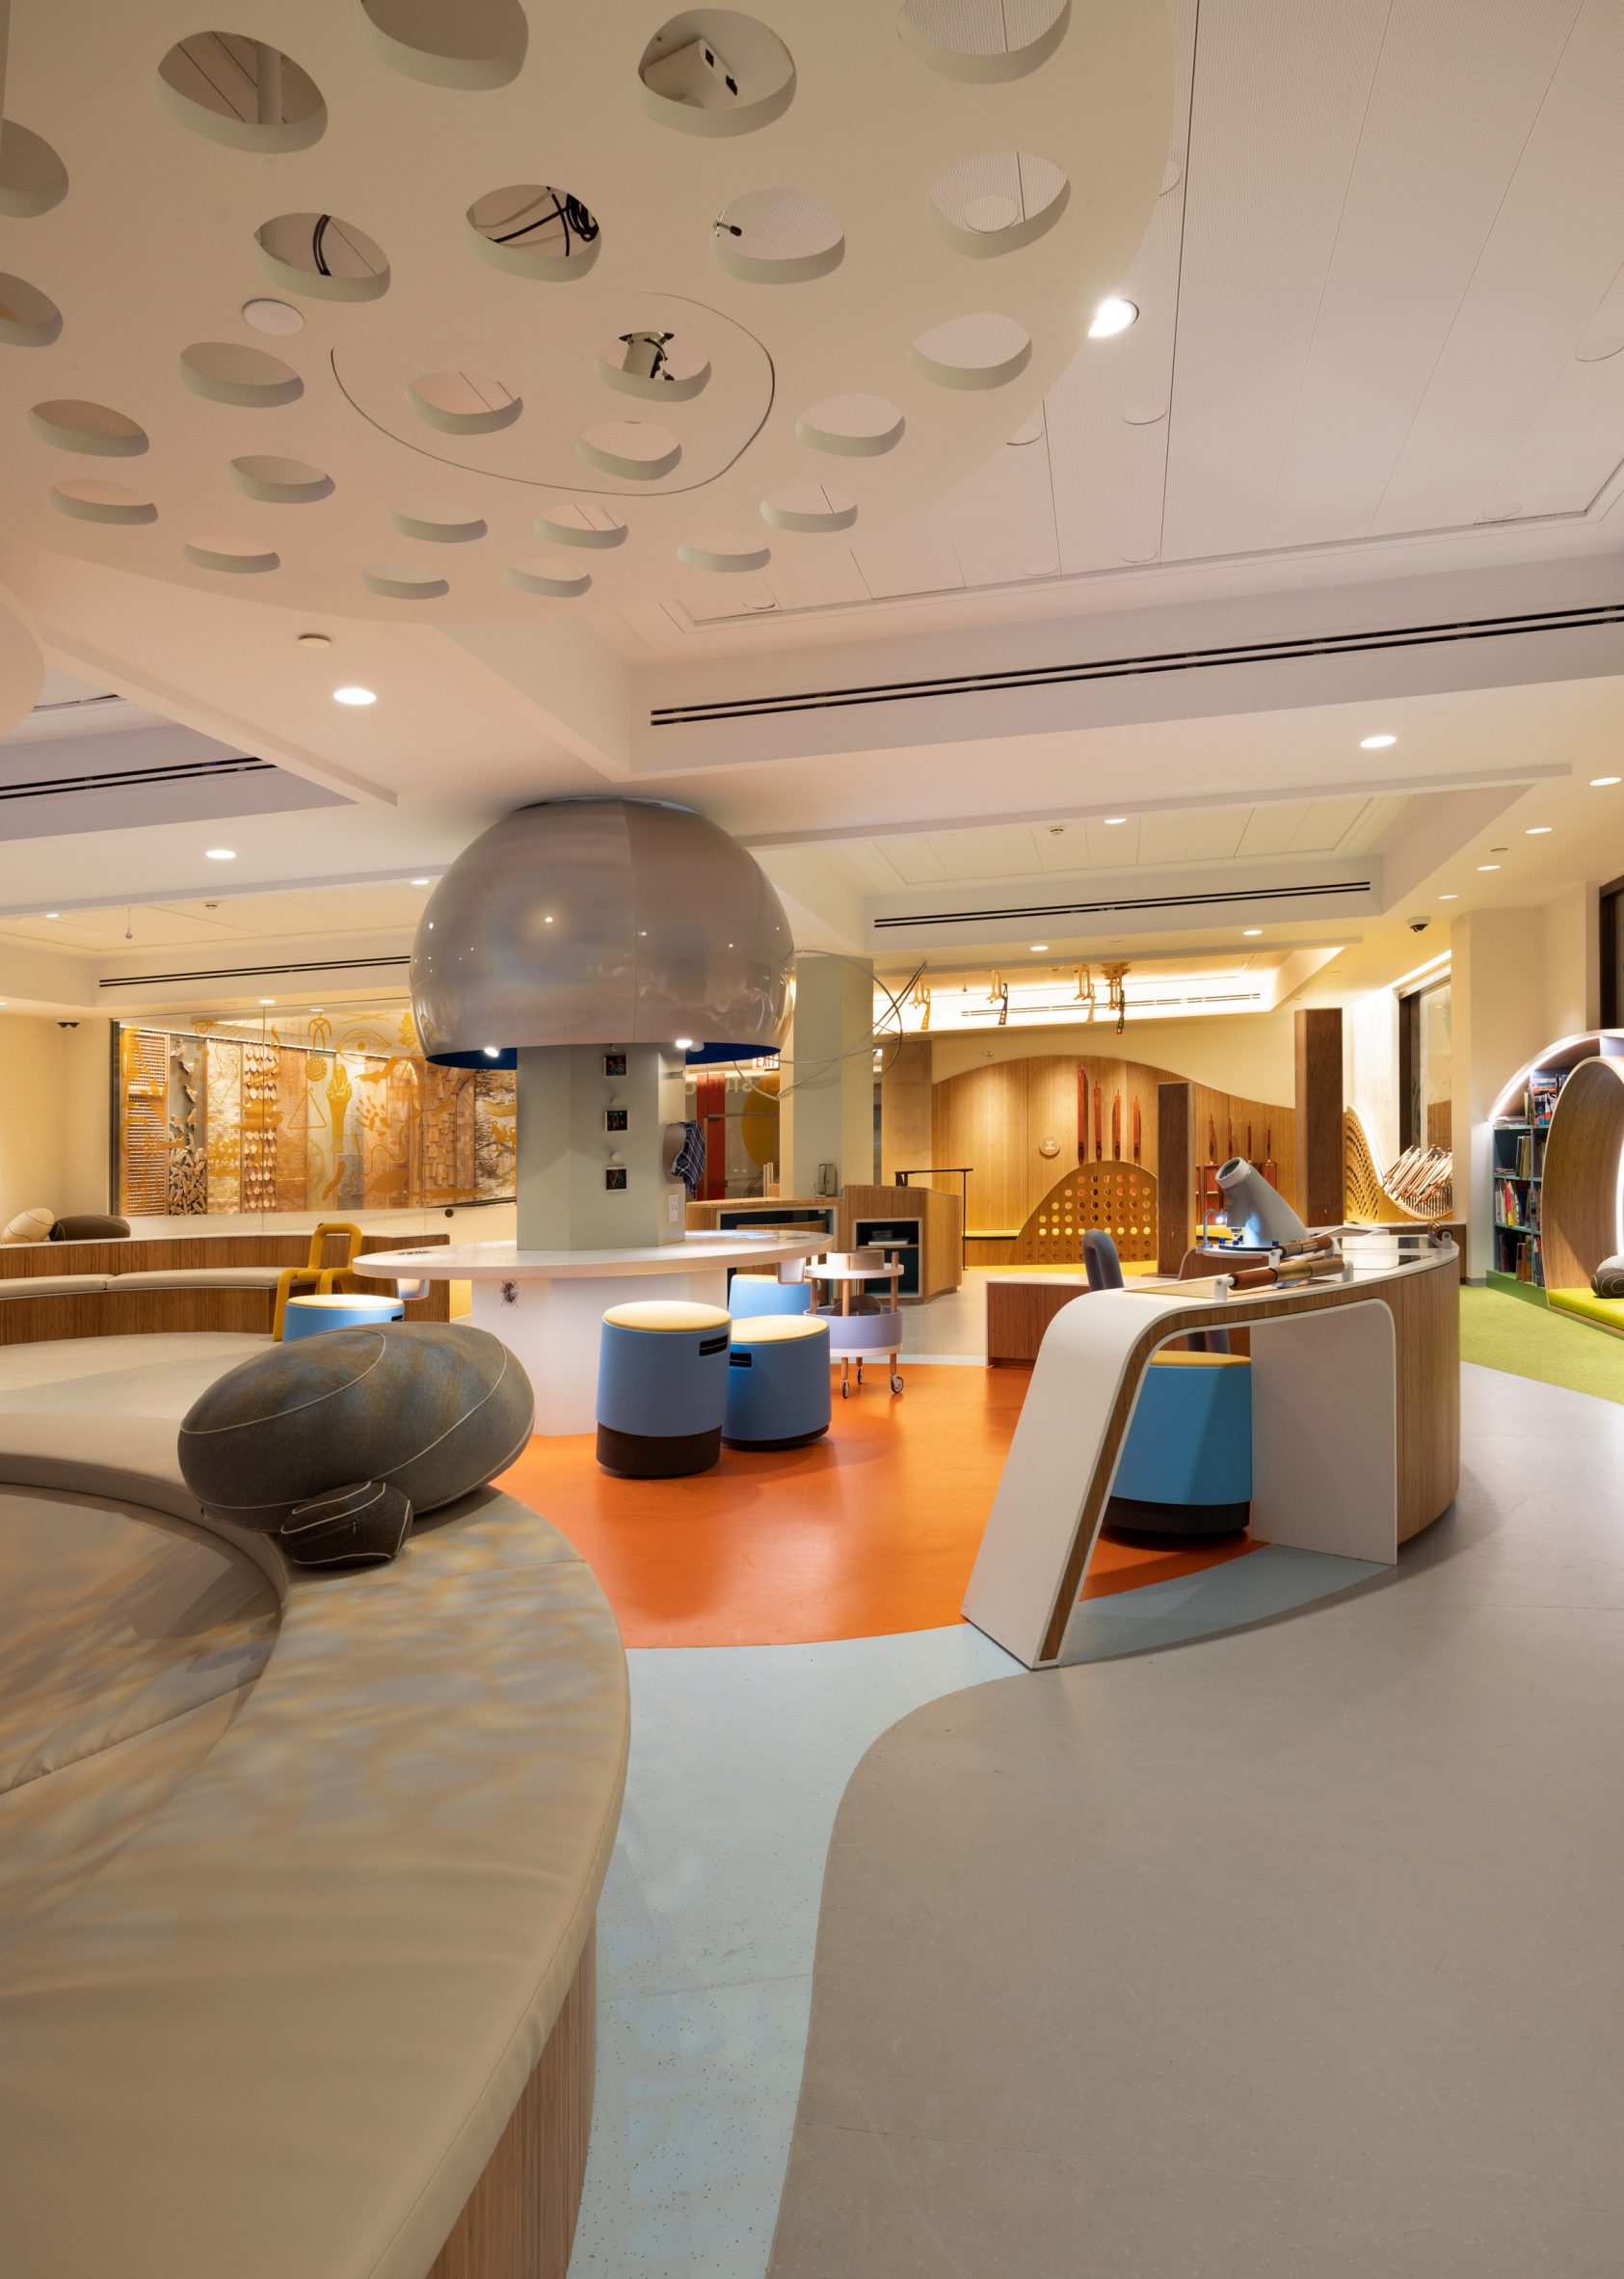 Playroom with layered ceiling and curving benches and stools